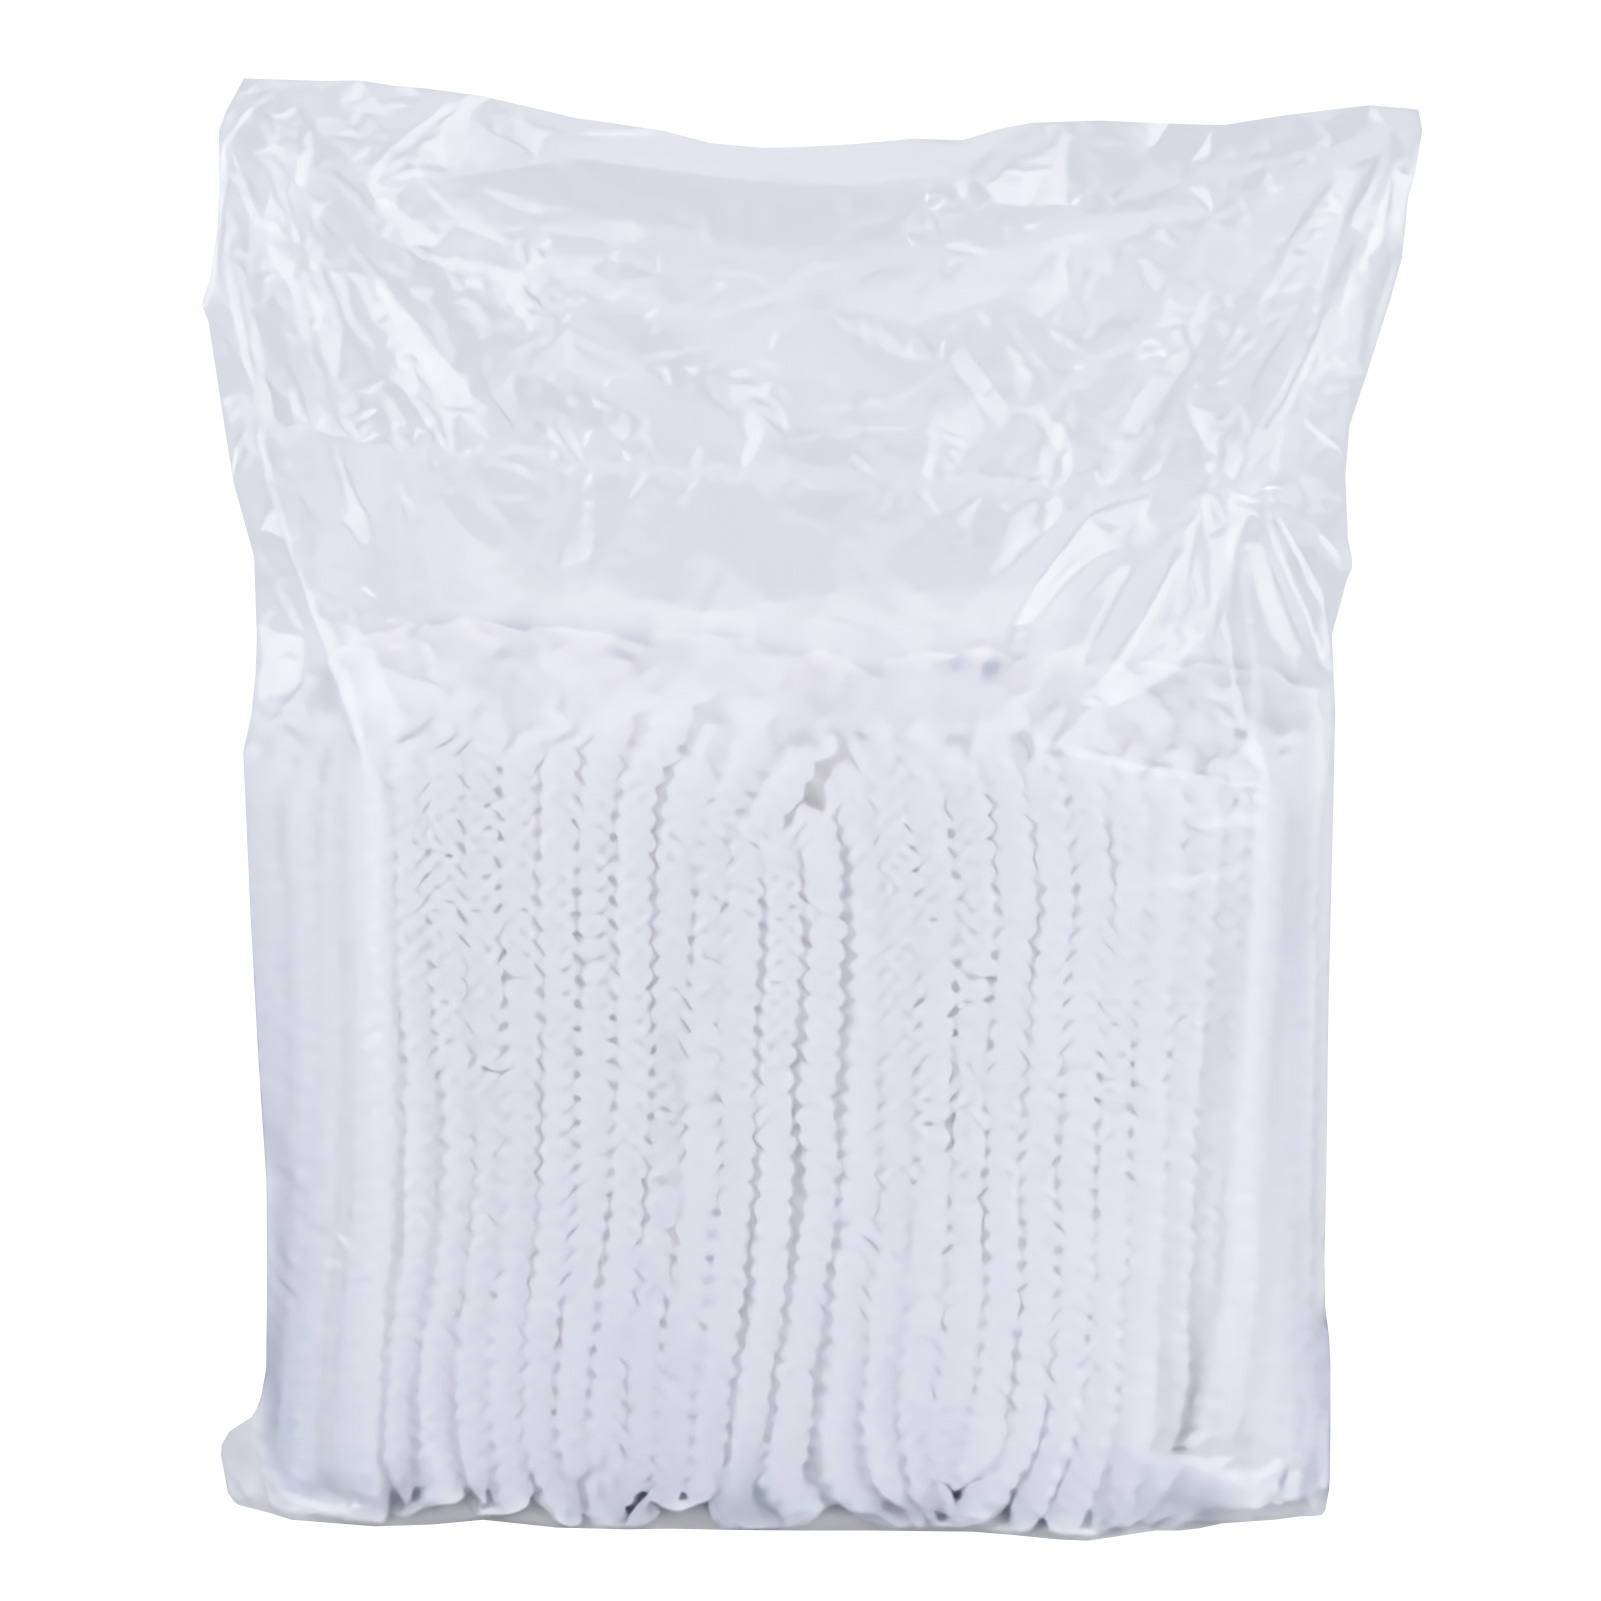 ADAMAS-BETA Double-strand Non-woven Fabric Bar Cap Disposable Cleaning Headgear Laboratory Breathable Dust-free Caps